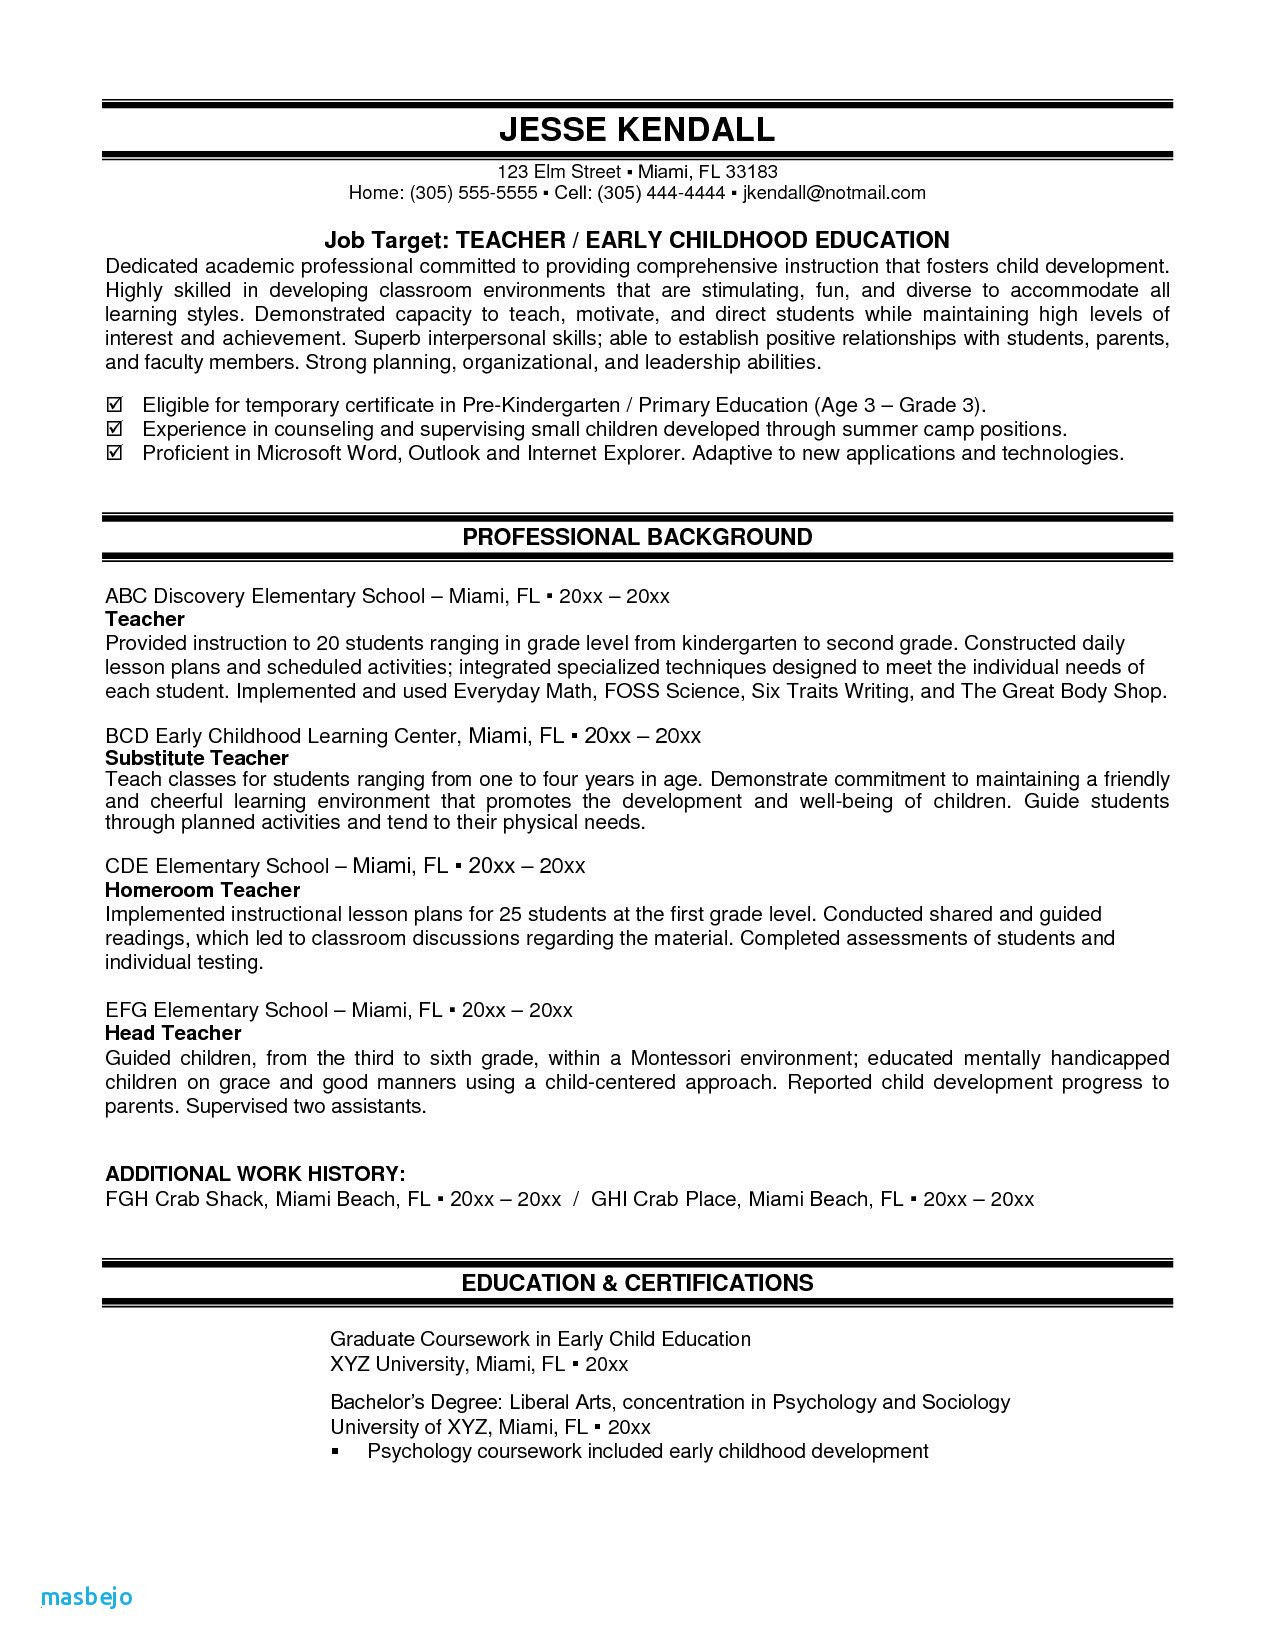 Sample Resume Objective for Child Care 80 Beautiful Image Of Resume Examples Child Care assistant …